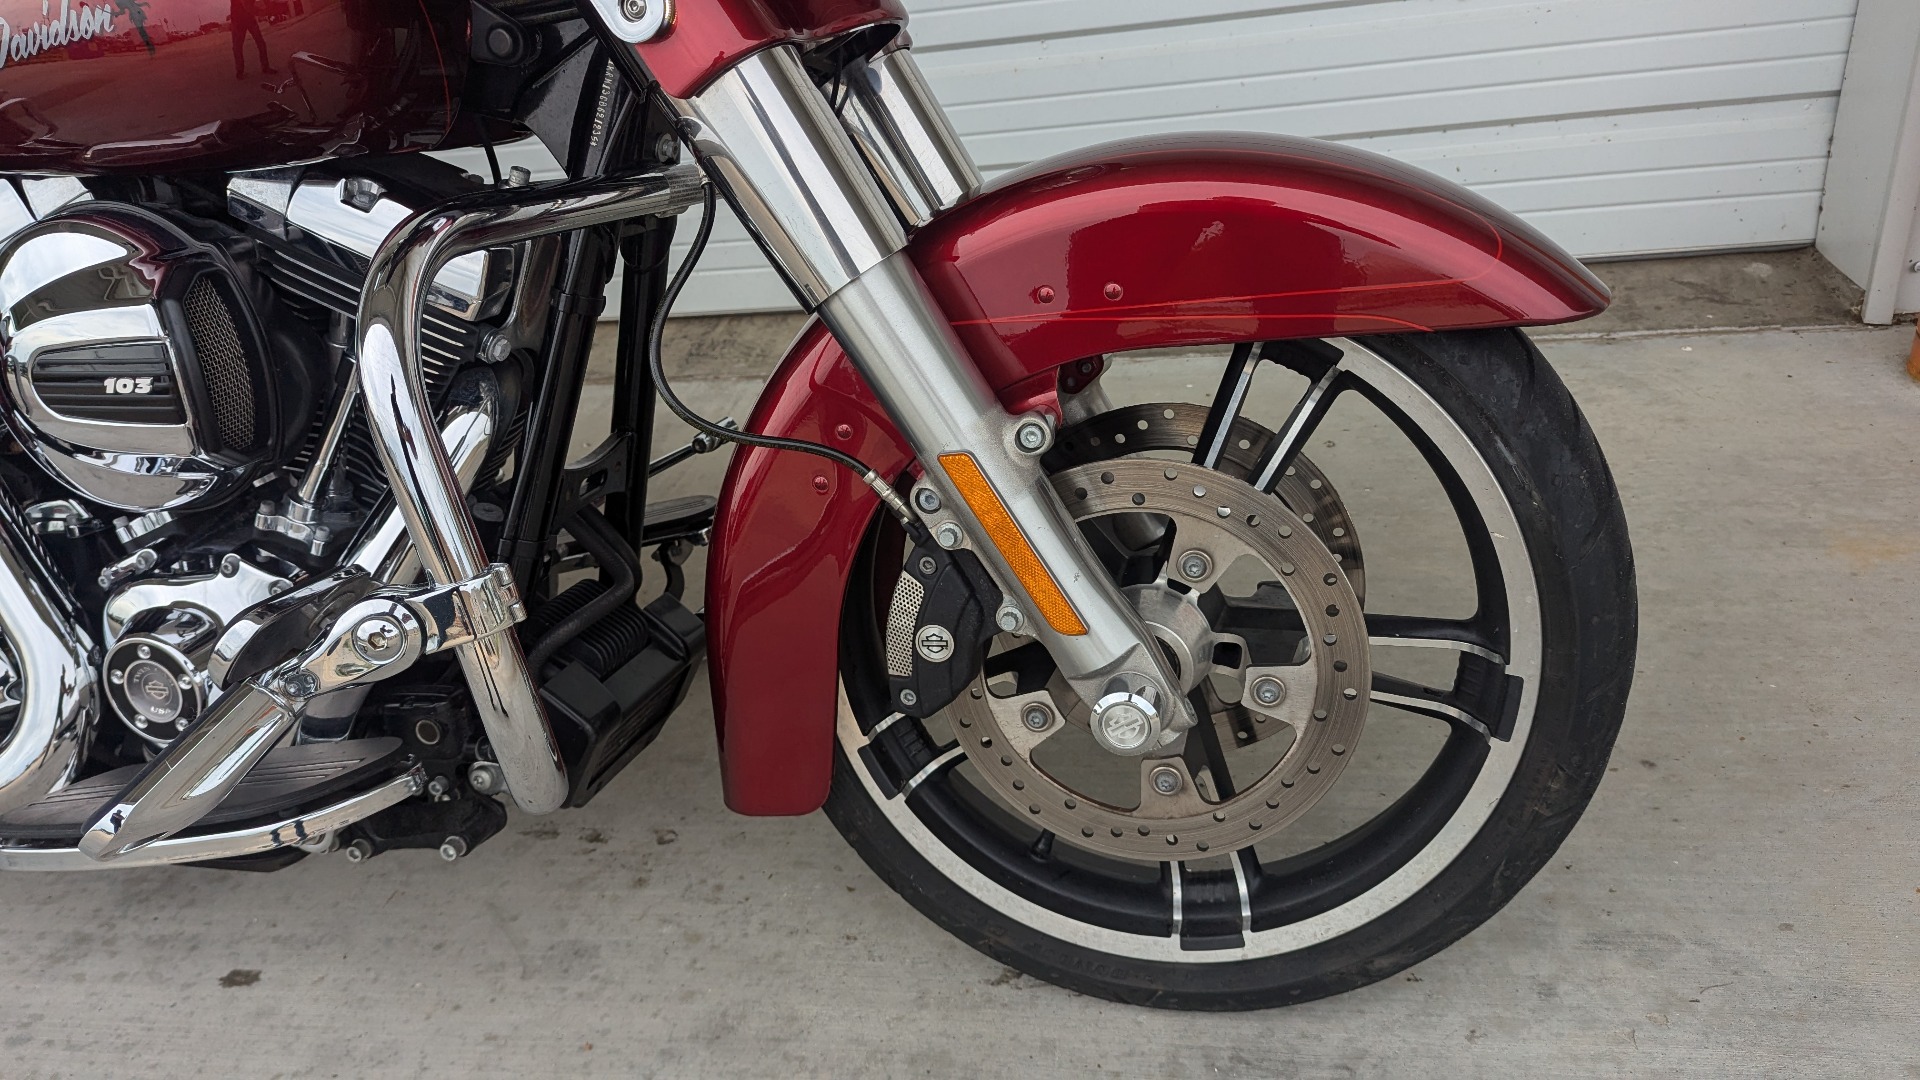 2016 harley davidson street glide special velocity red for sale in mississippi - Photo 3